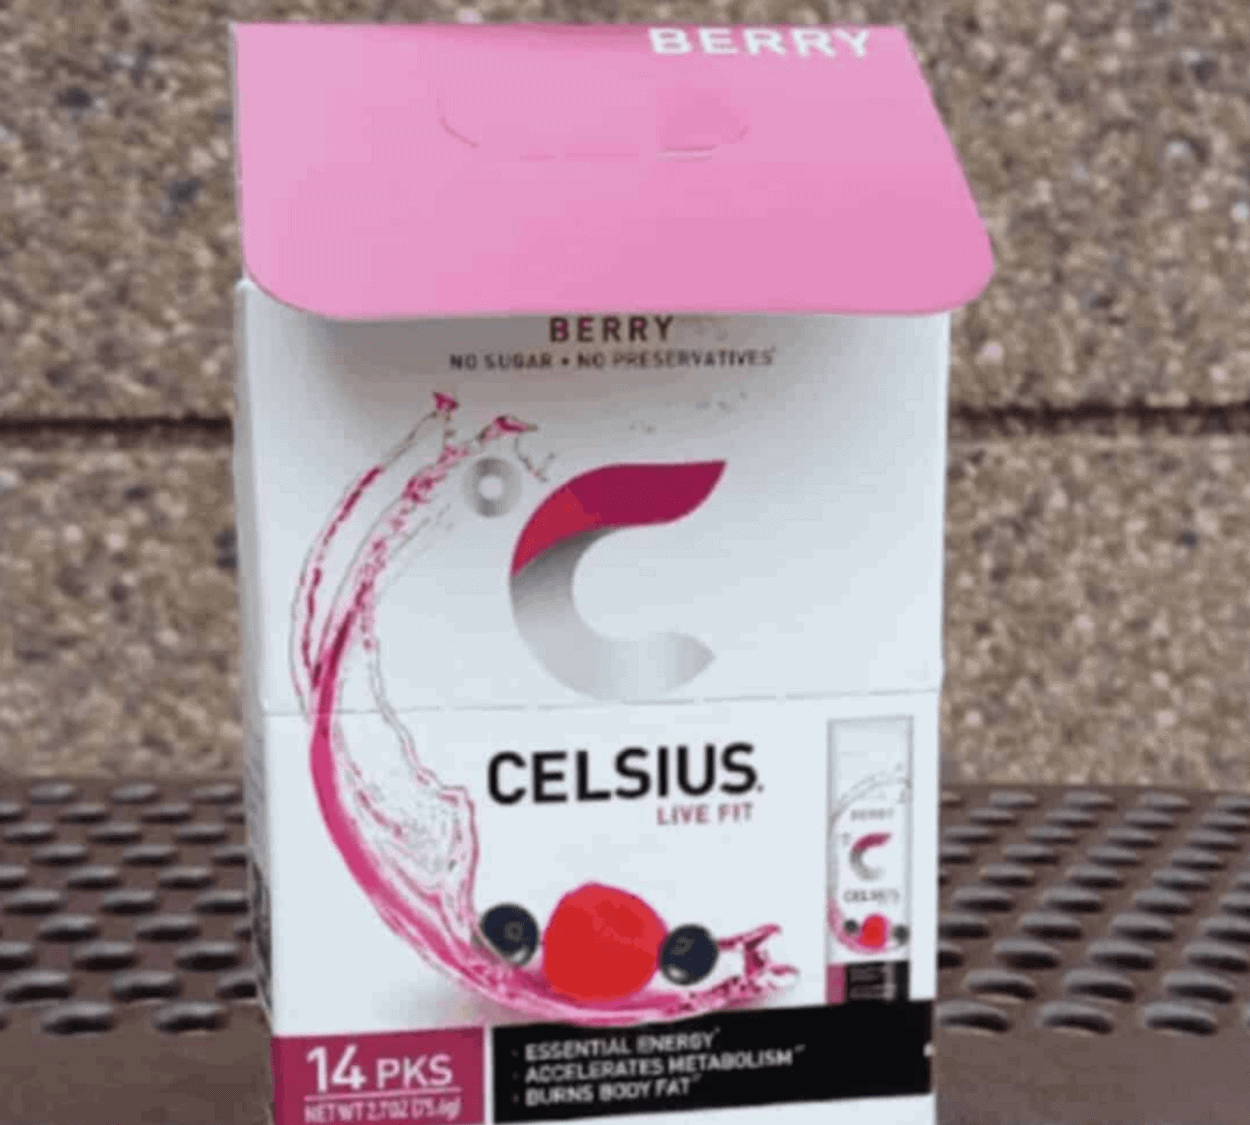 Celsius On-The-Go berry-flavored energy beverage.